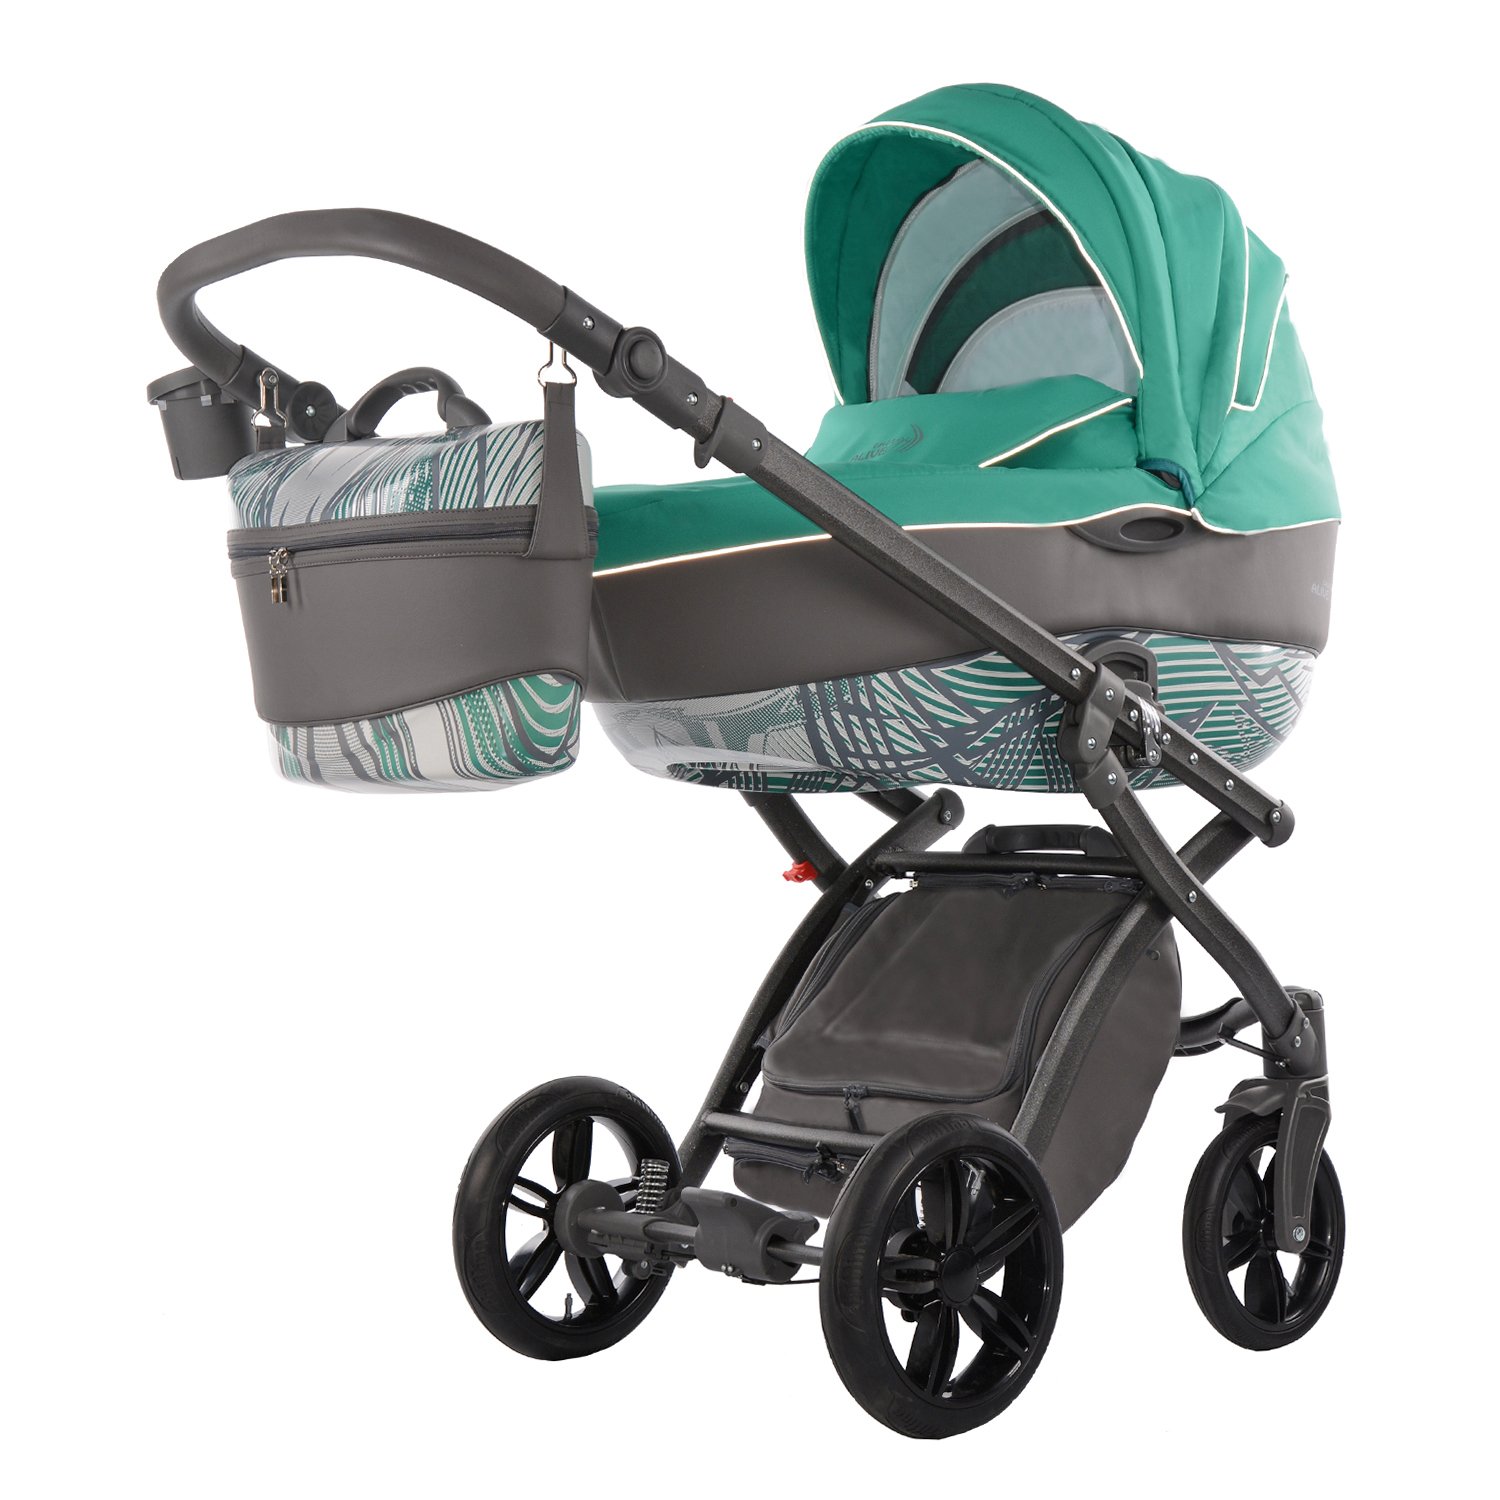 Knorr-Baby Alive 2 Combi Pushchair 3544 Energy – Green